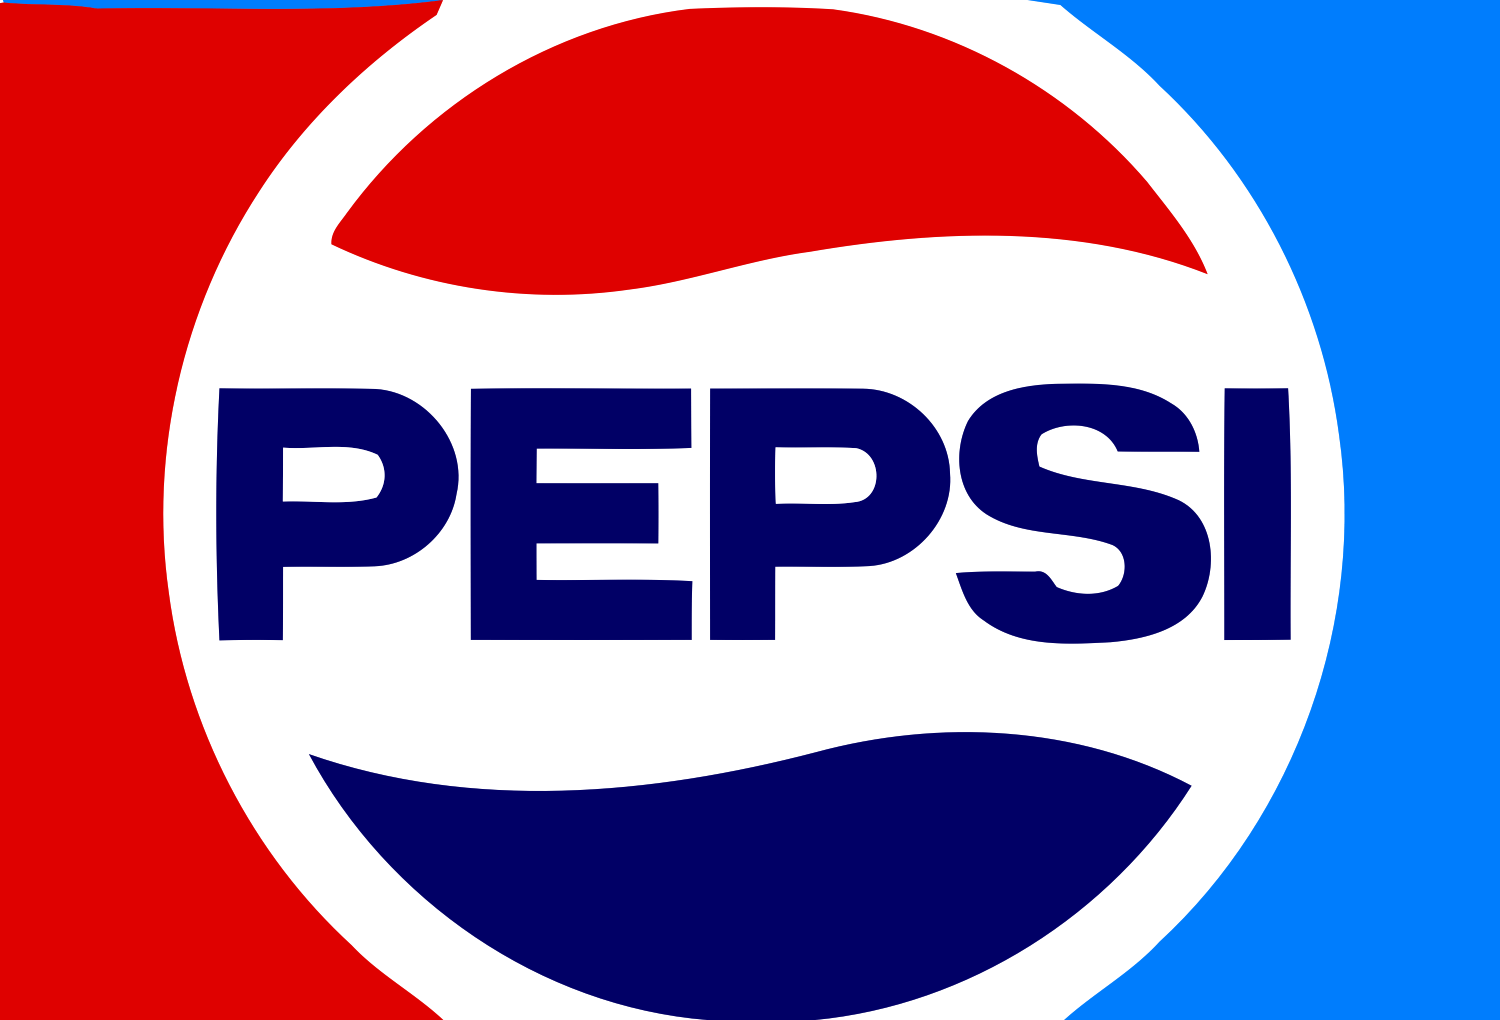 HD LOGO Wallpapers PEPSI text / Wallpapers Logos 63505 high quality